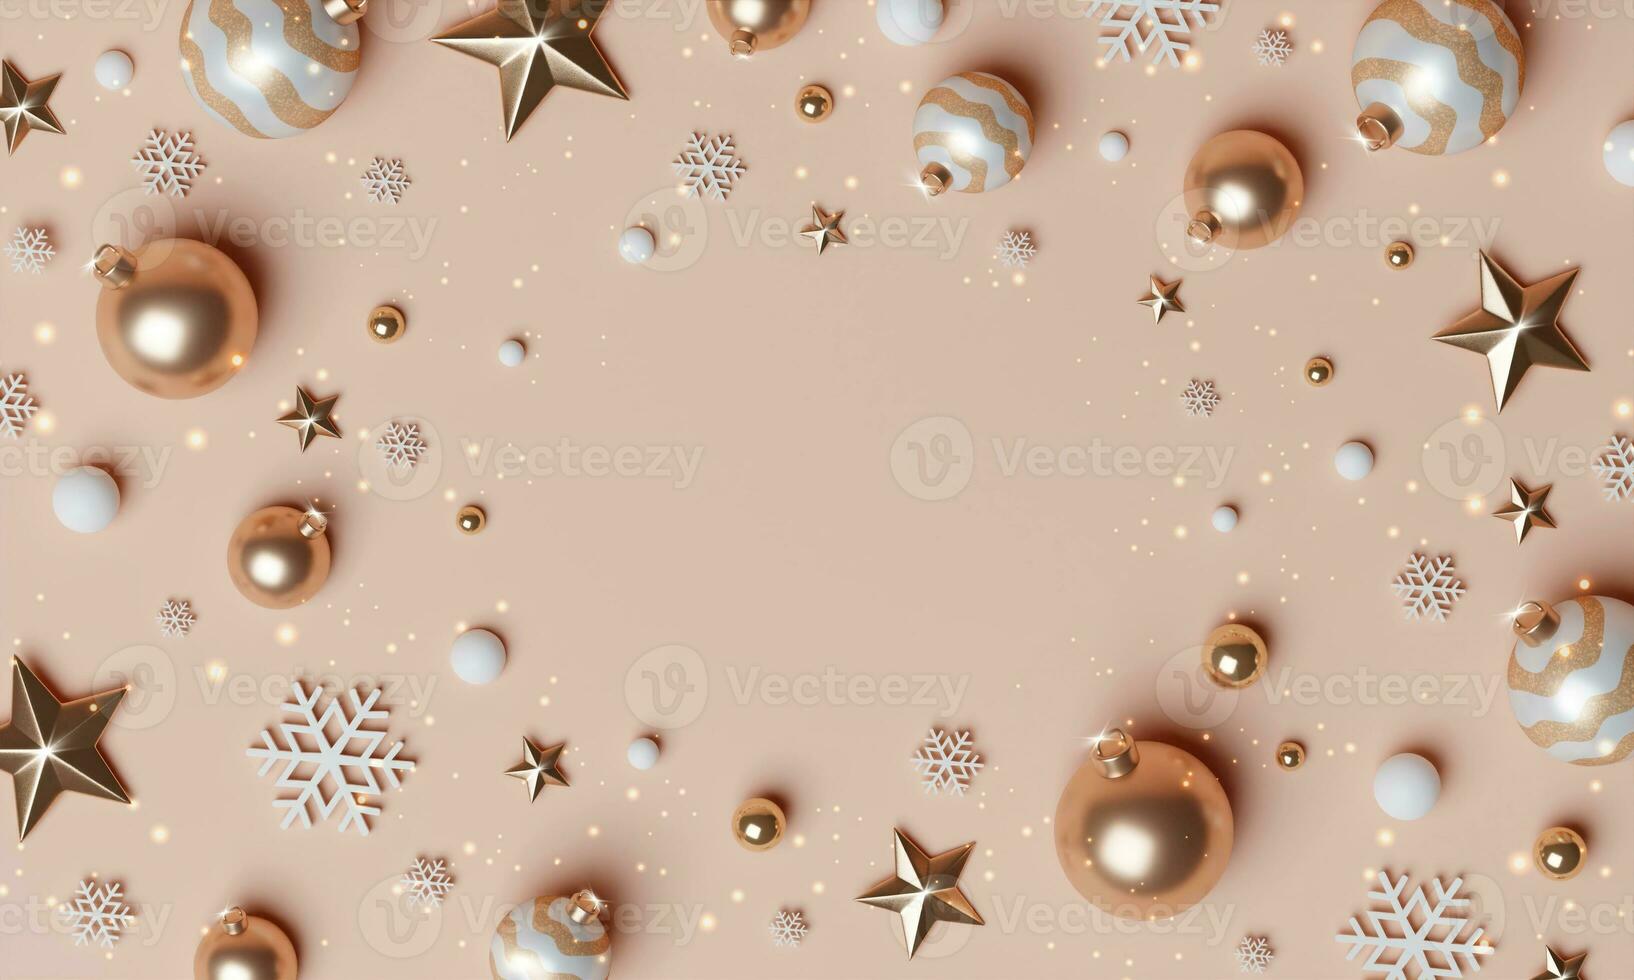 3d Christmas Abstract wallpaper. Realistic . Decorative festive elements glass bauble balls. Xmas holiday template podium. photo